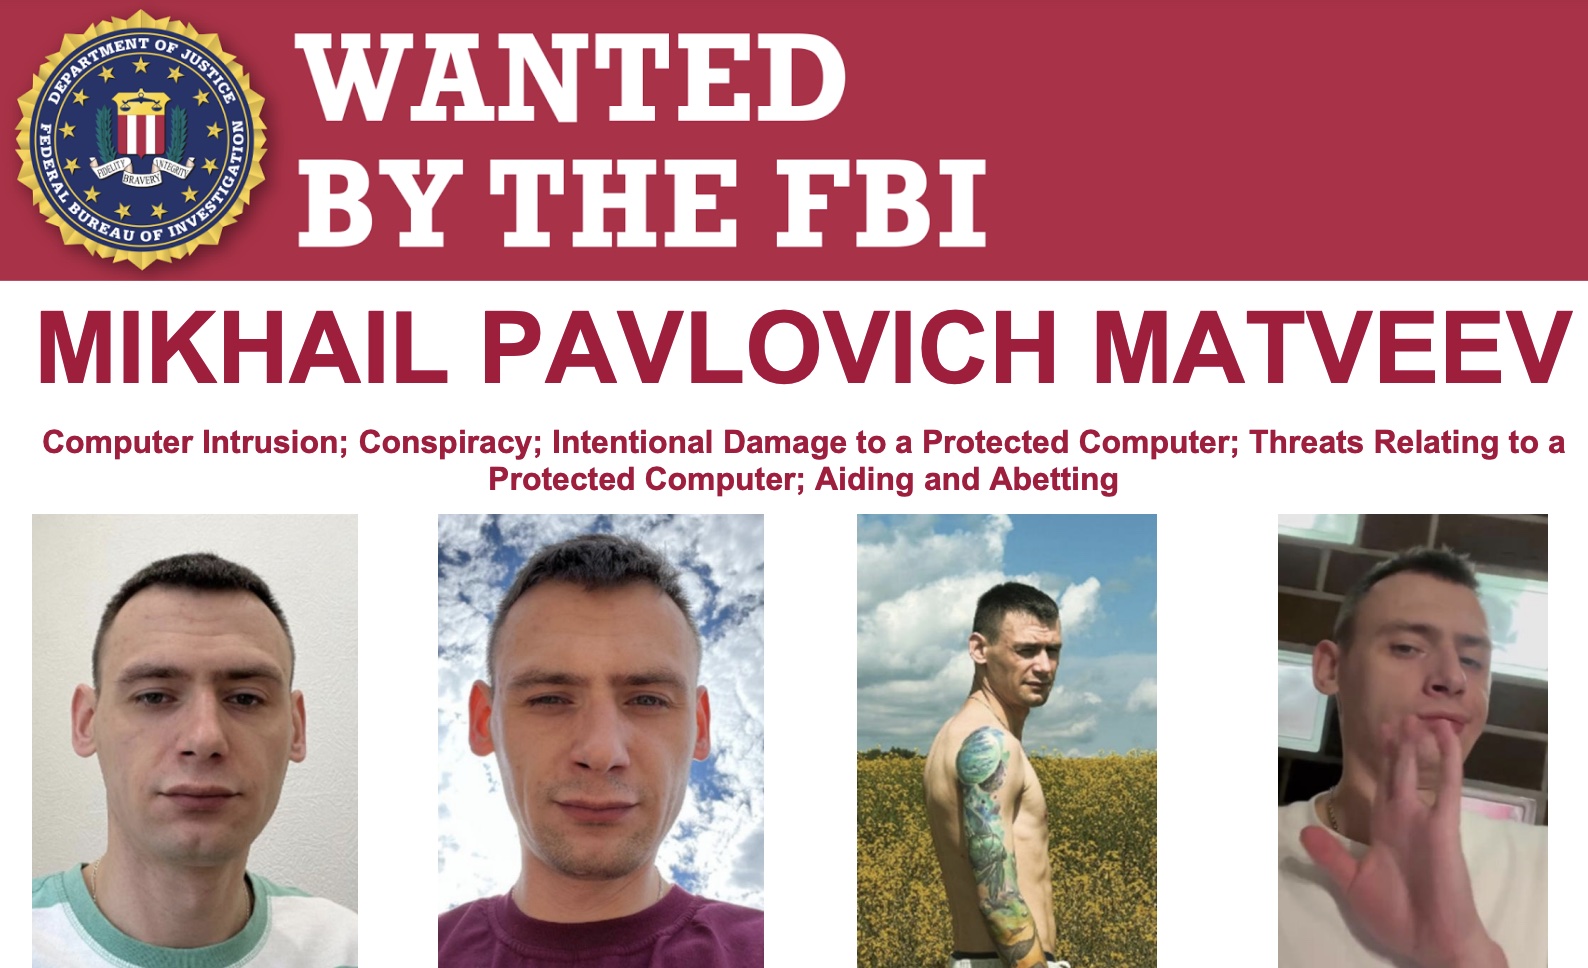 Matveev's most wanted poster